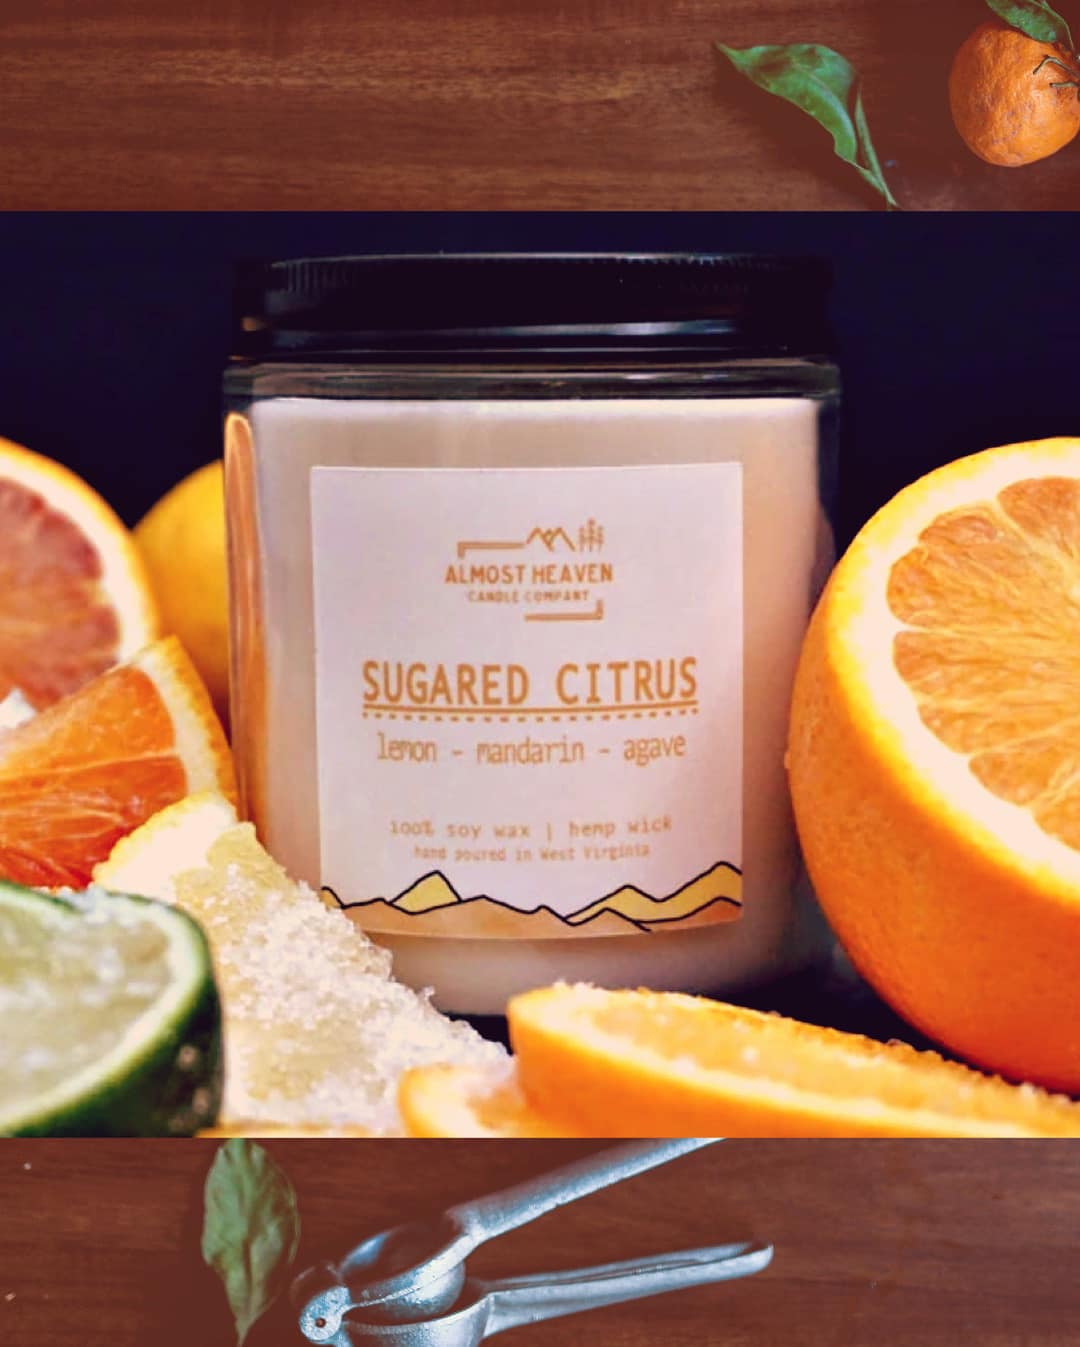 https://centremarket.org/wp-content/uploads/Almost-Heaven-candle-3.jpg